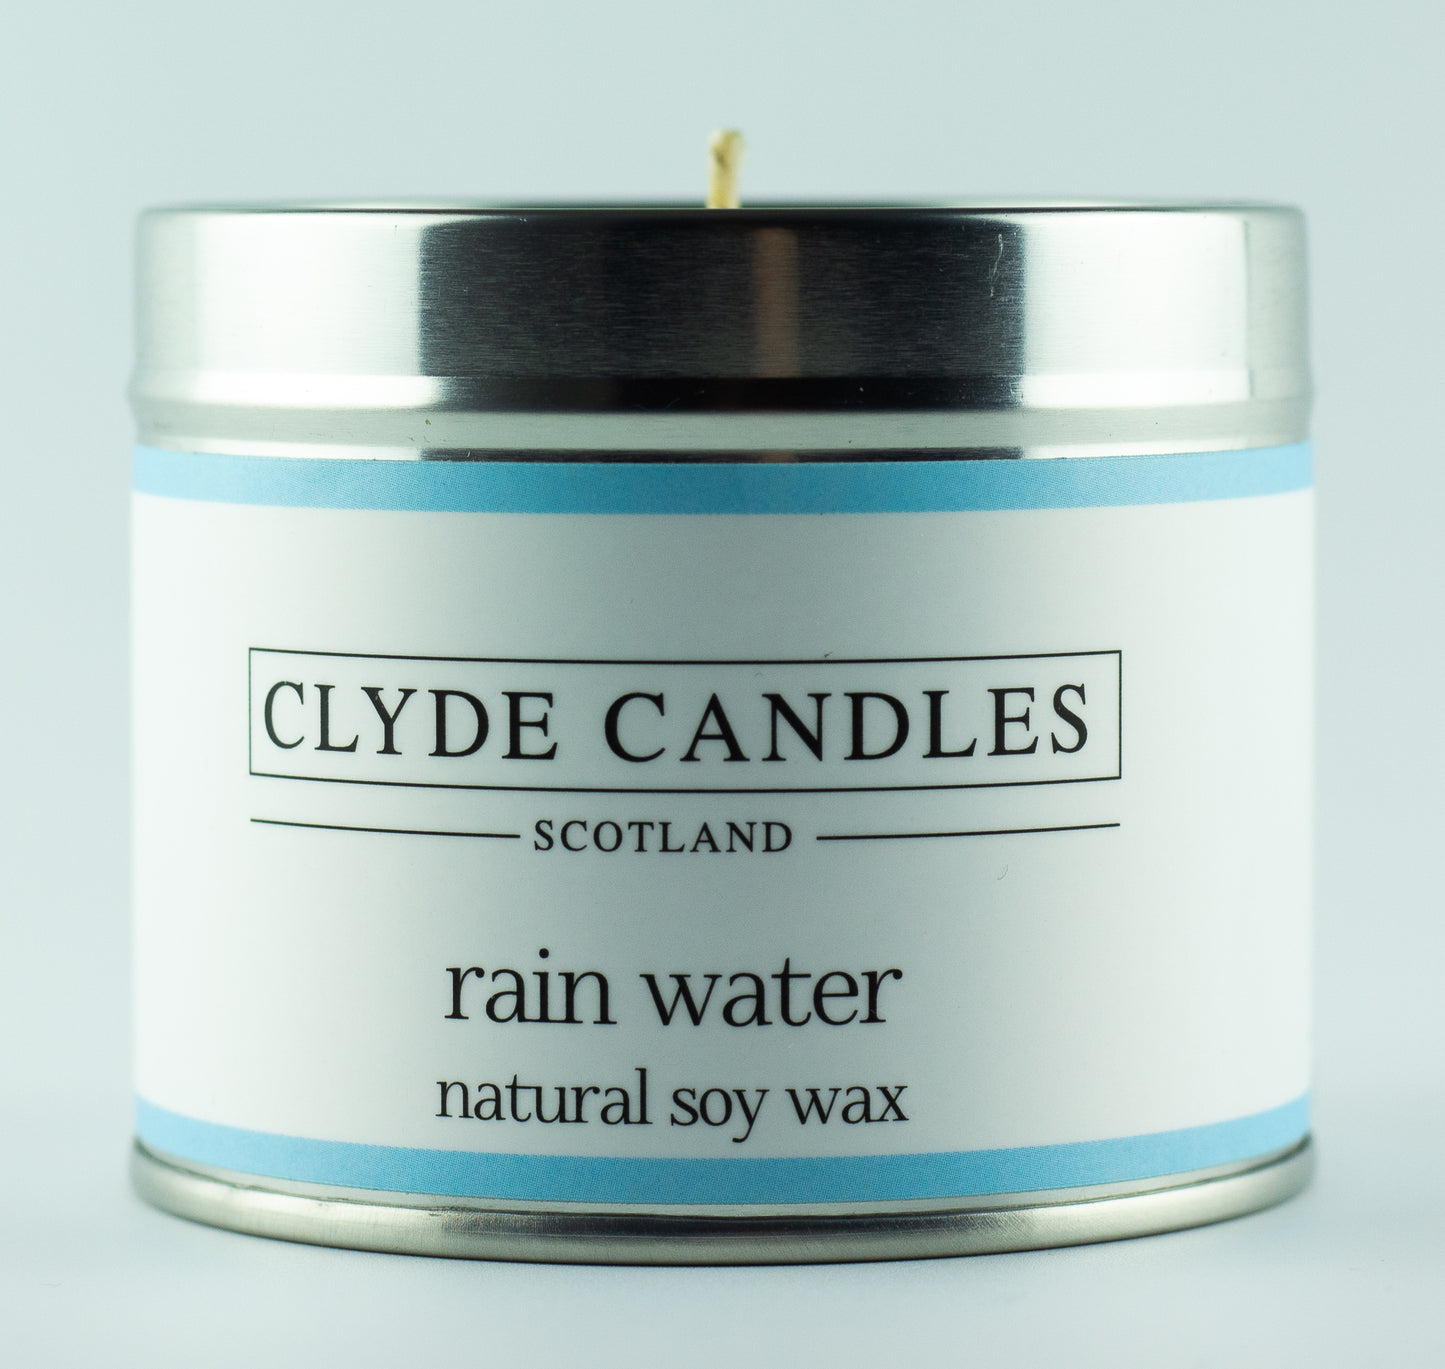 Rain Water Scented Candle Tin, Natural Soy wax, Scottish Candles, Clyde Candles